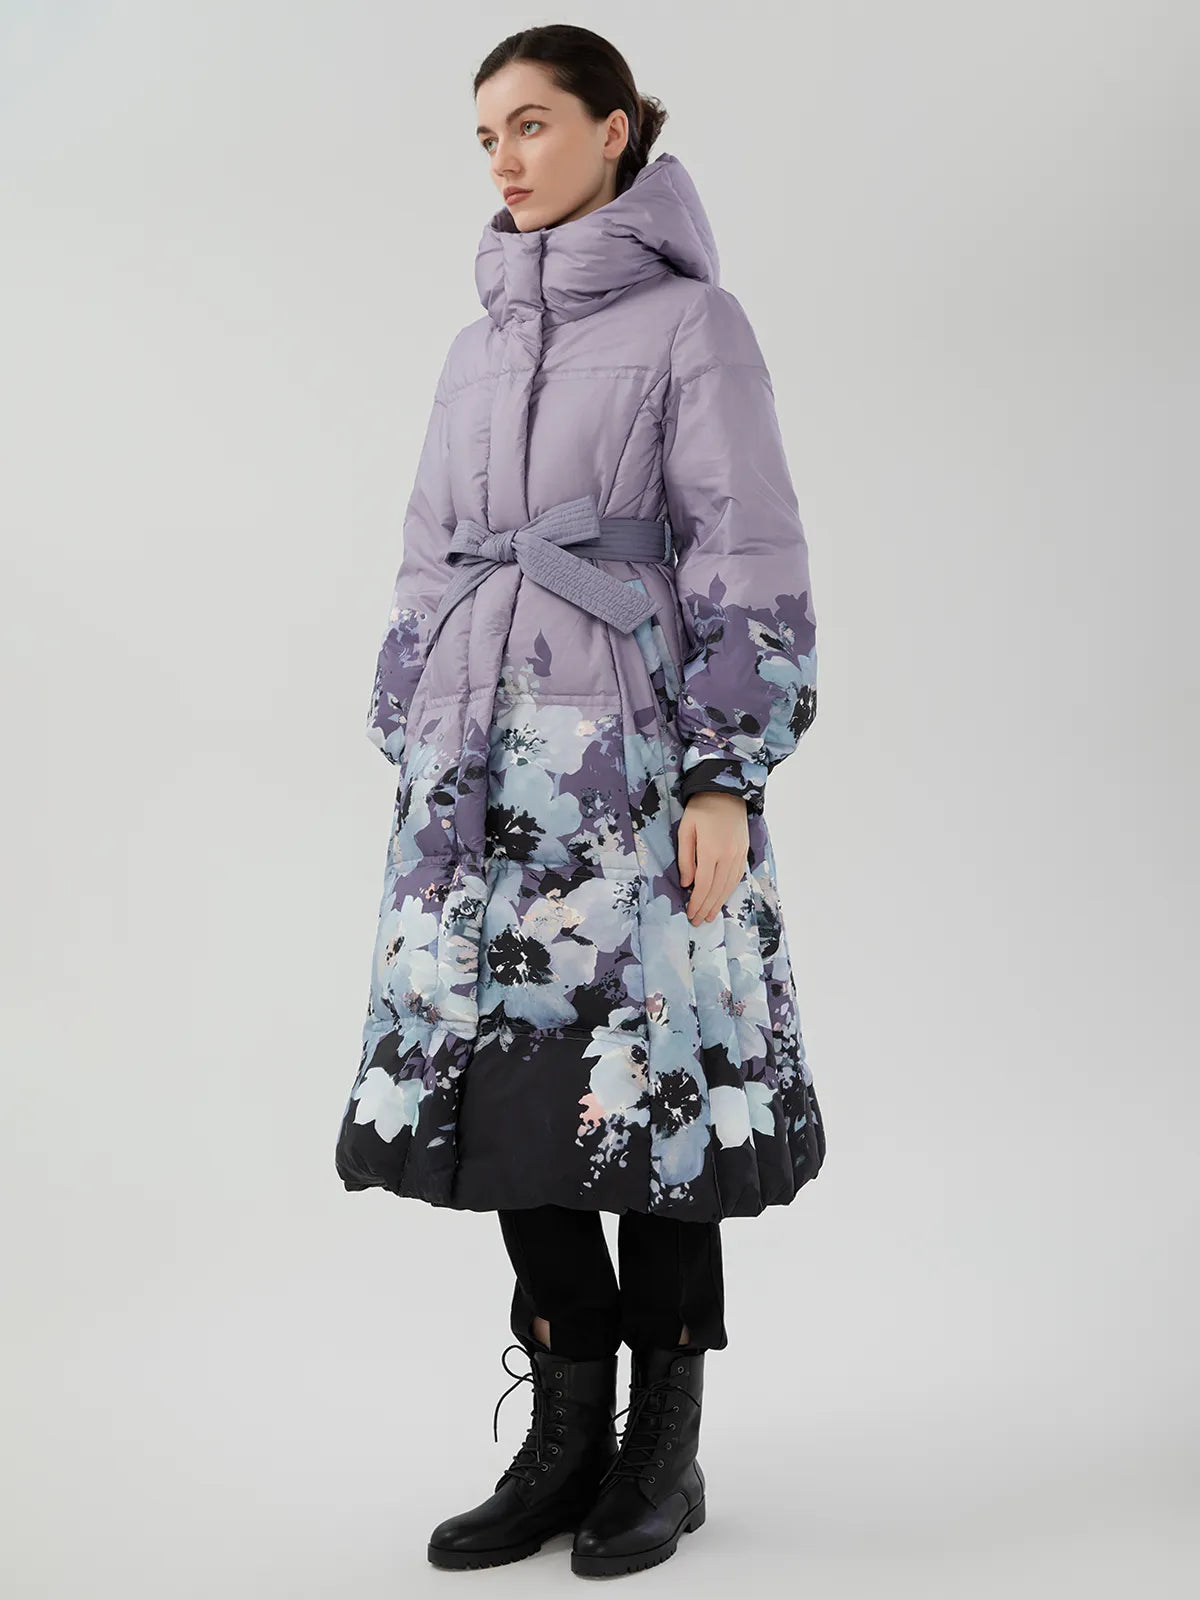 A-Line Silhouette Down Jacket with Floral Sleeves and Hem Detail